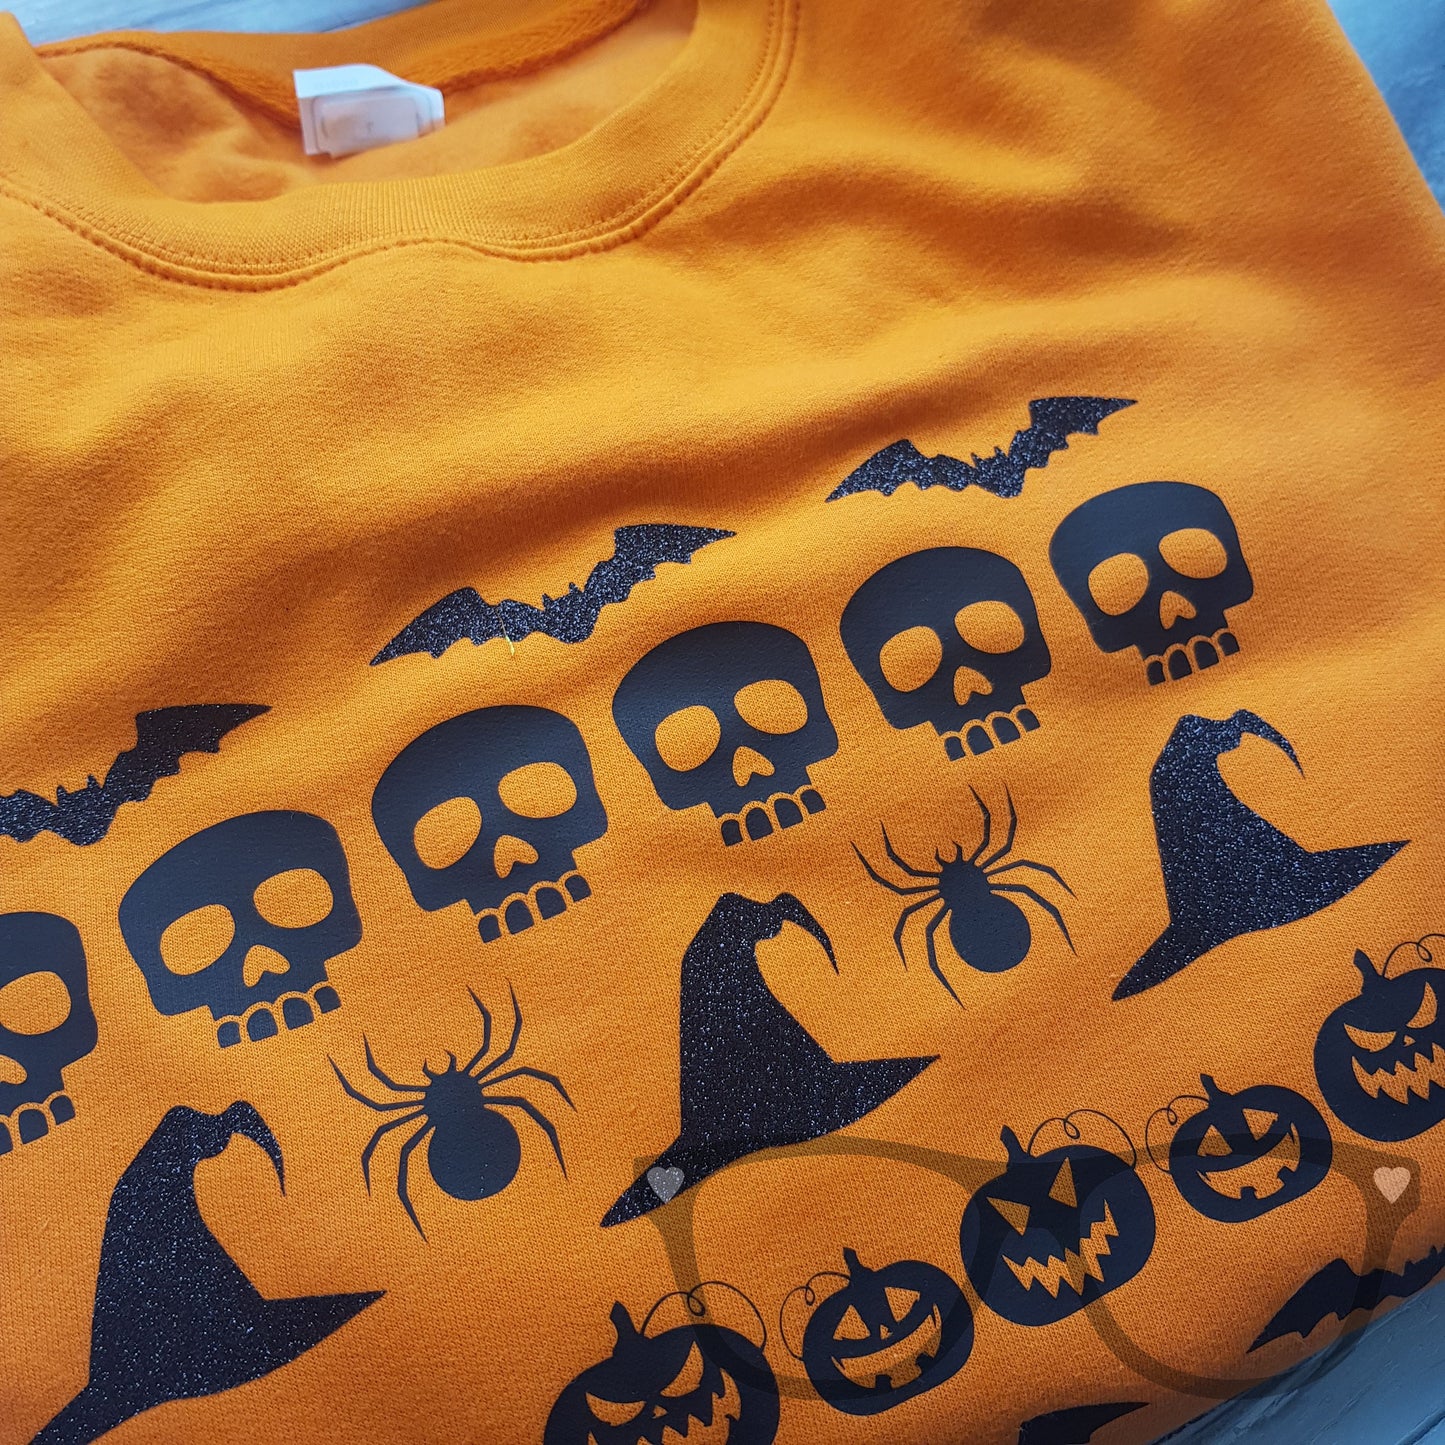 Close up of the Halloween Sweater showing the glitter and black vinyl graphics